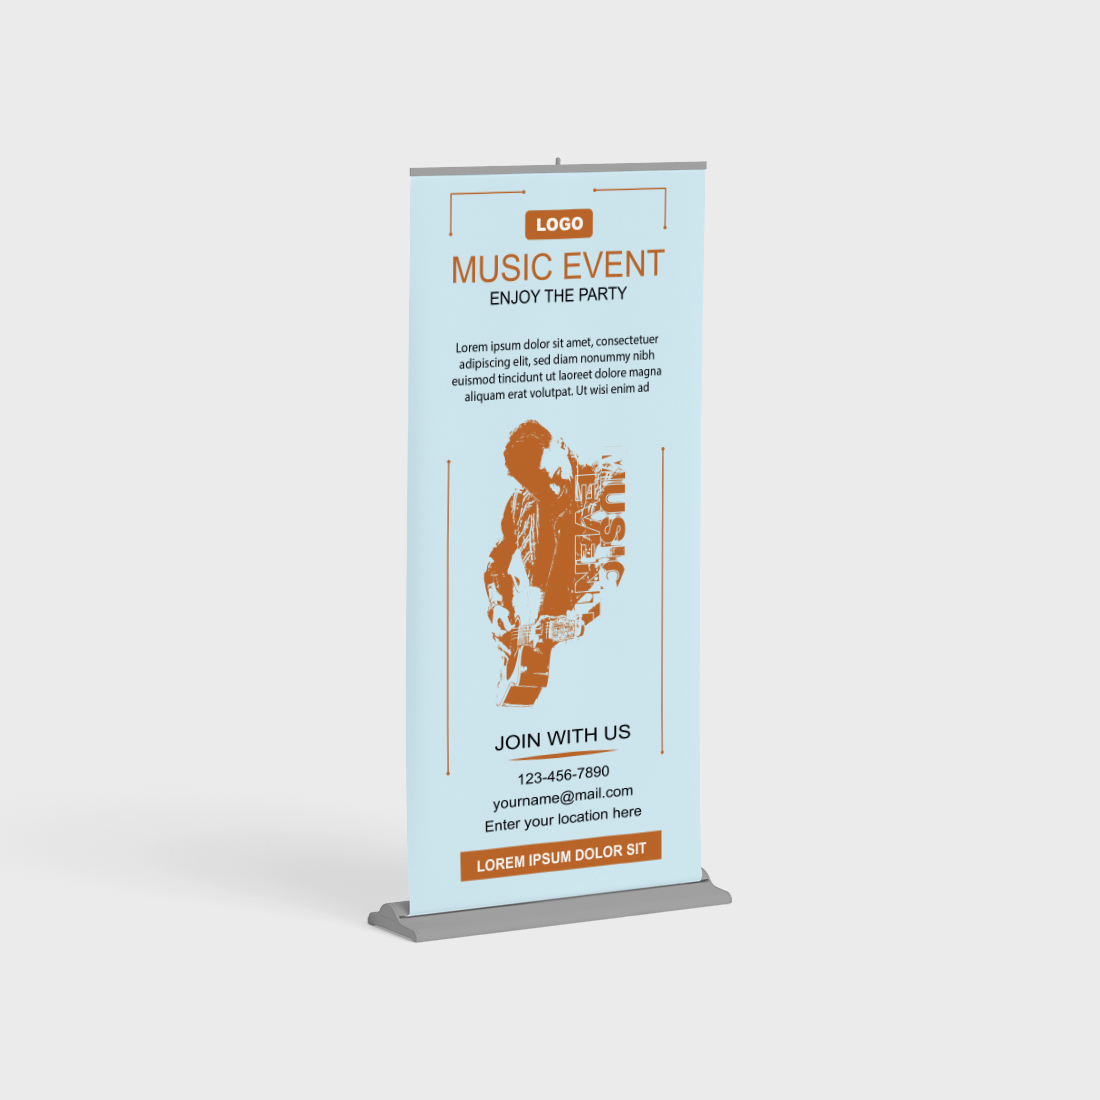 24 Event Roll Up Banner Or Pull Up Banner Or Stand Banner Or X Banner And Billboard Signage Design Template, Event Banner, Modern X-Banner, Rectangle Size, Event Poster Leaflet Design, Print-Ready, Roll Up Vector Eps Design cover image.